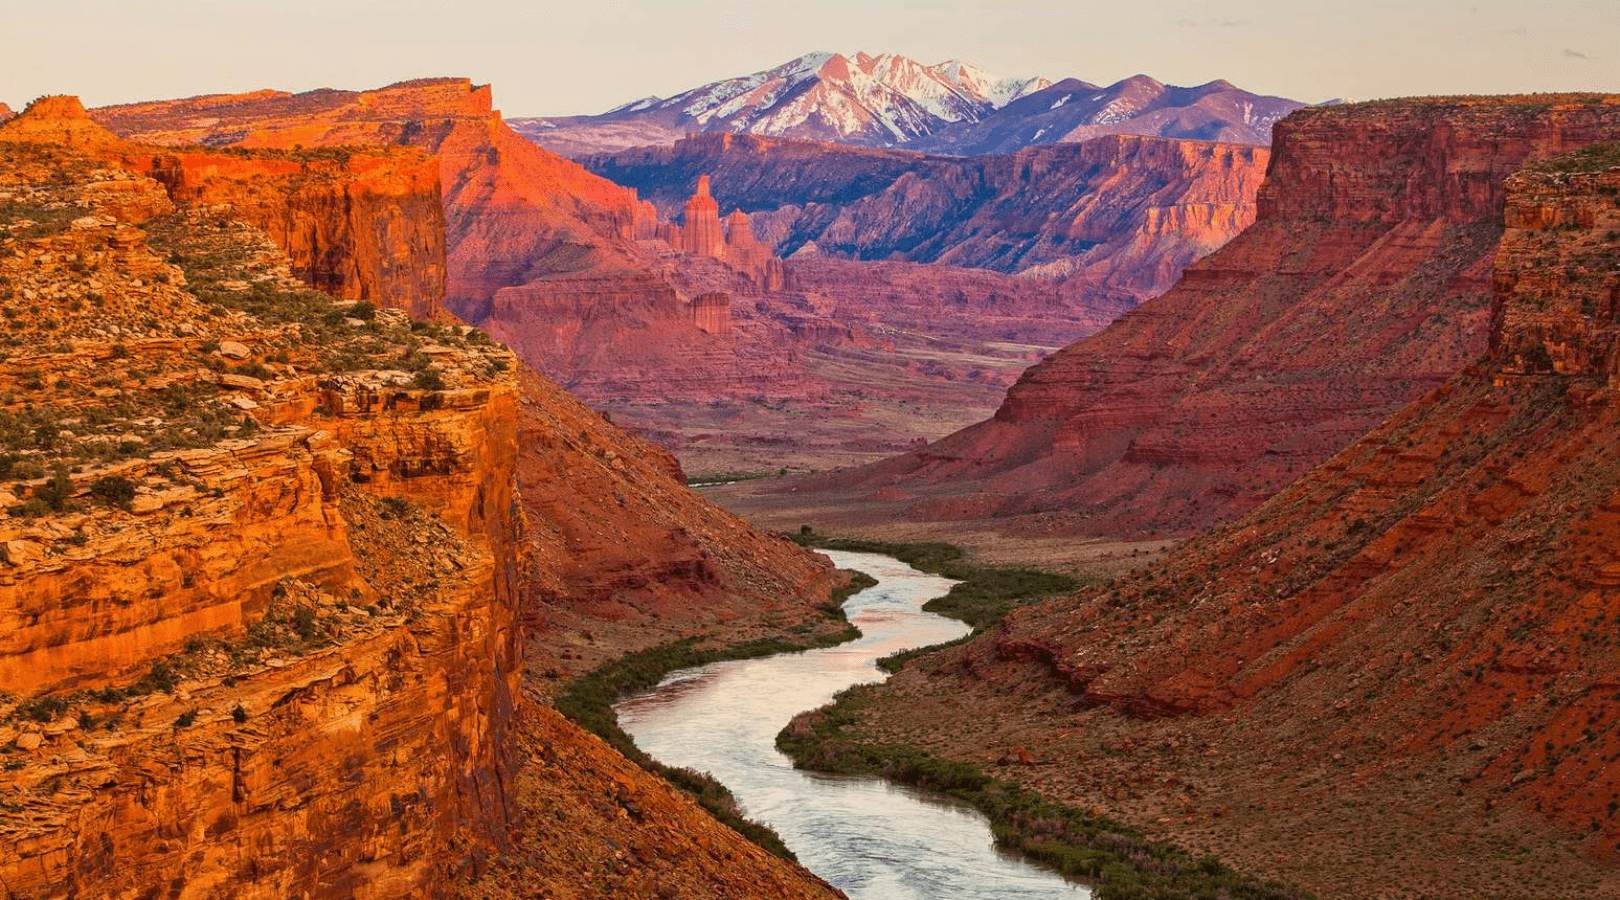 the colorado river flowing through red rock canyons with geological features like towers and buttes, and the la sal mountains in the background